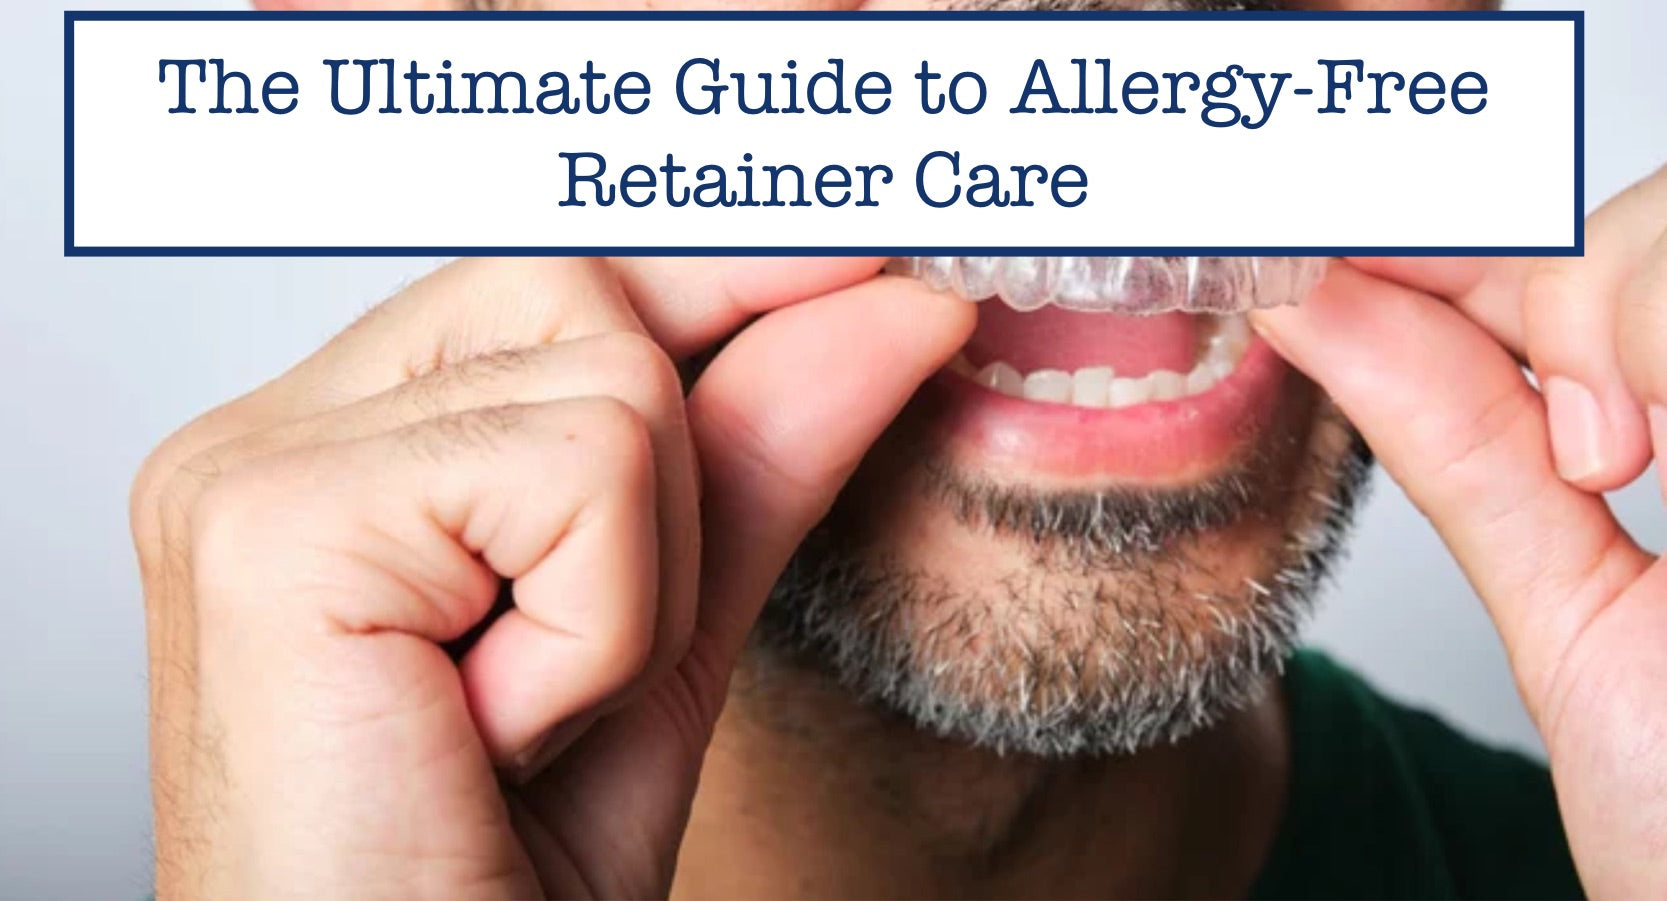 The Ultimate Guide to Allergy-Free Retainer Care